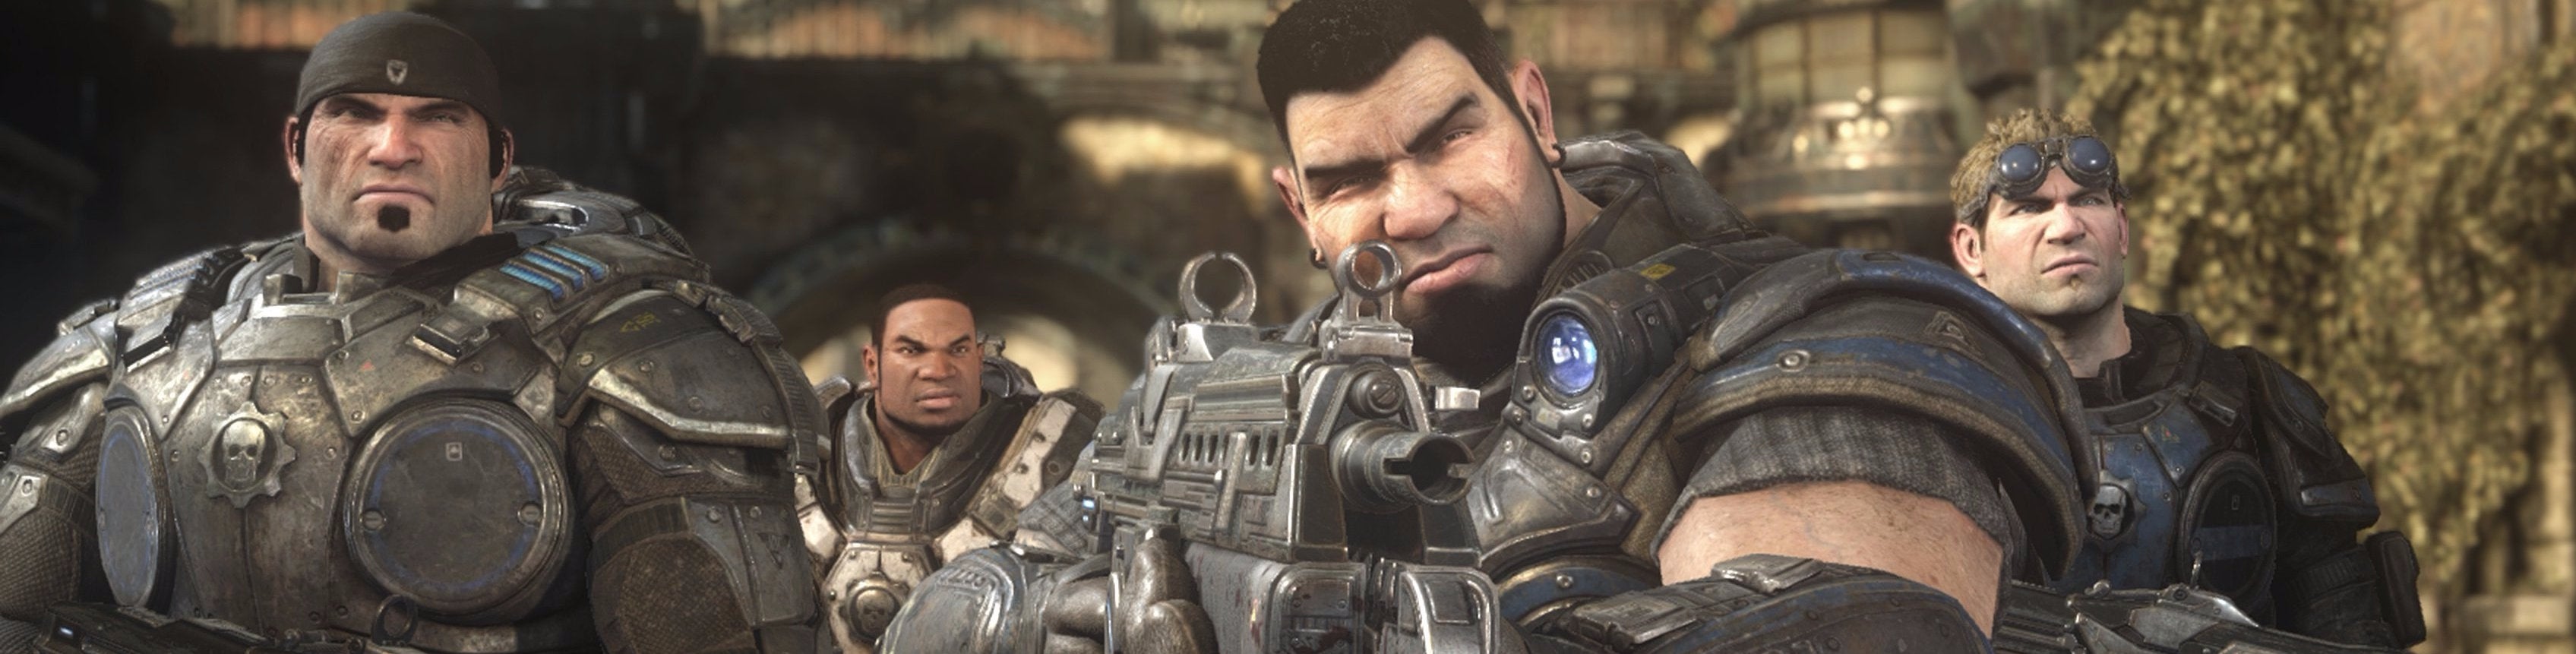 Image for The making of Gears of War: Ultimate Edition